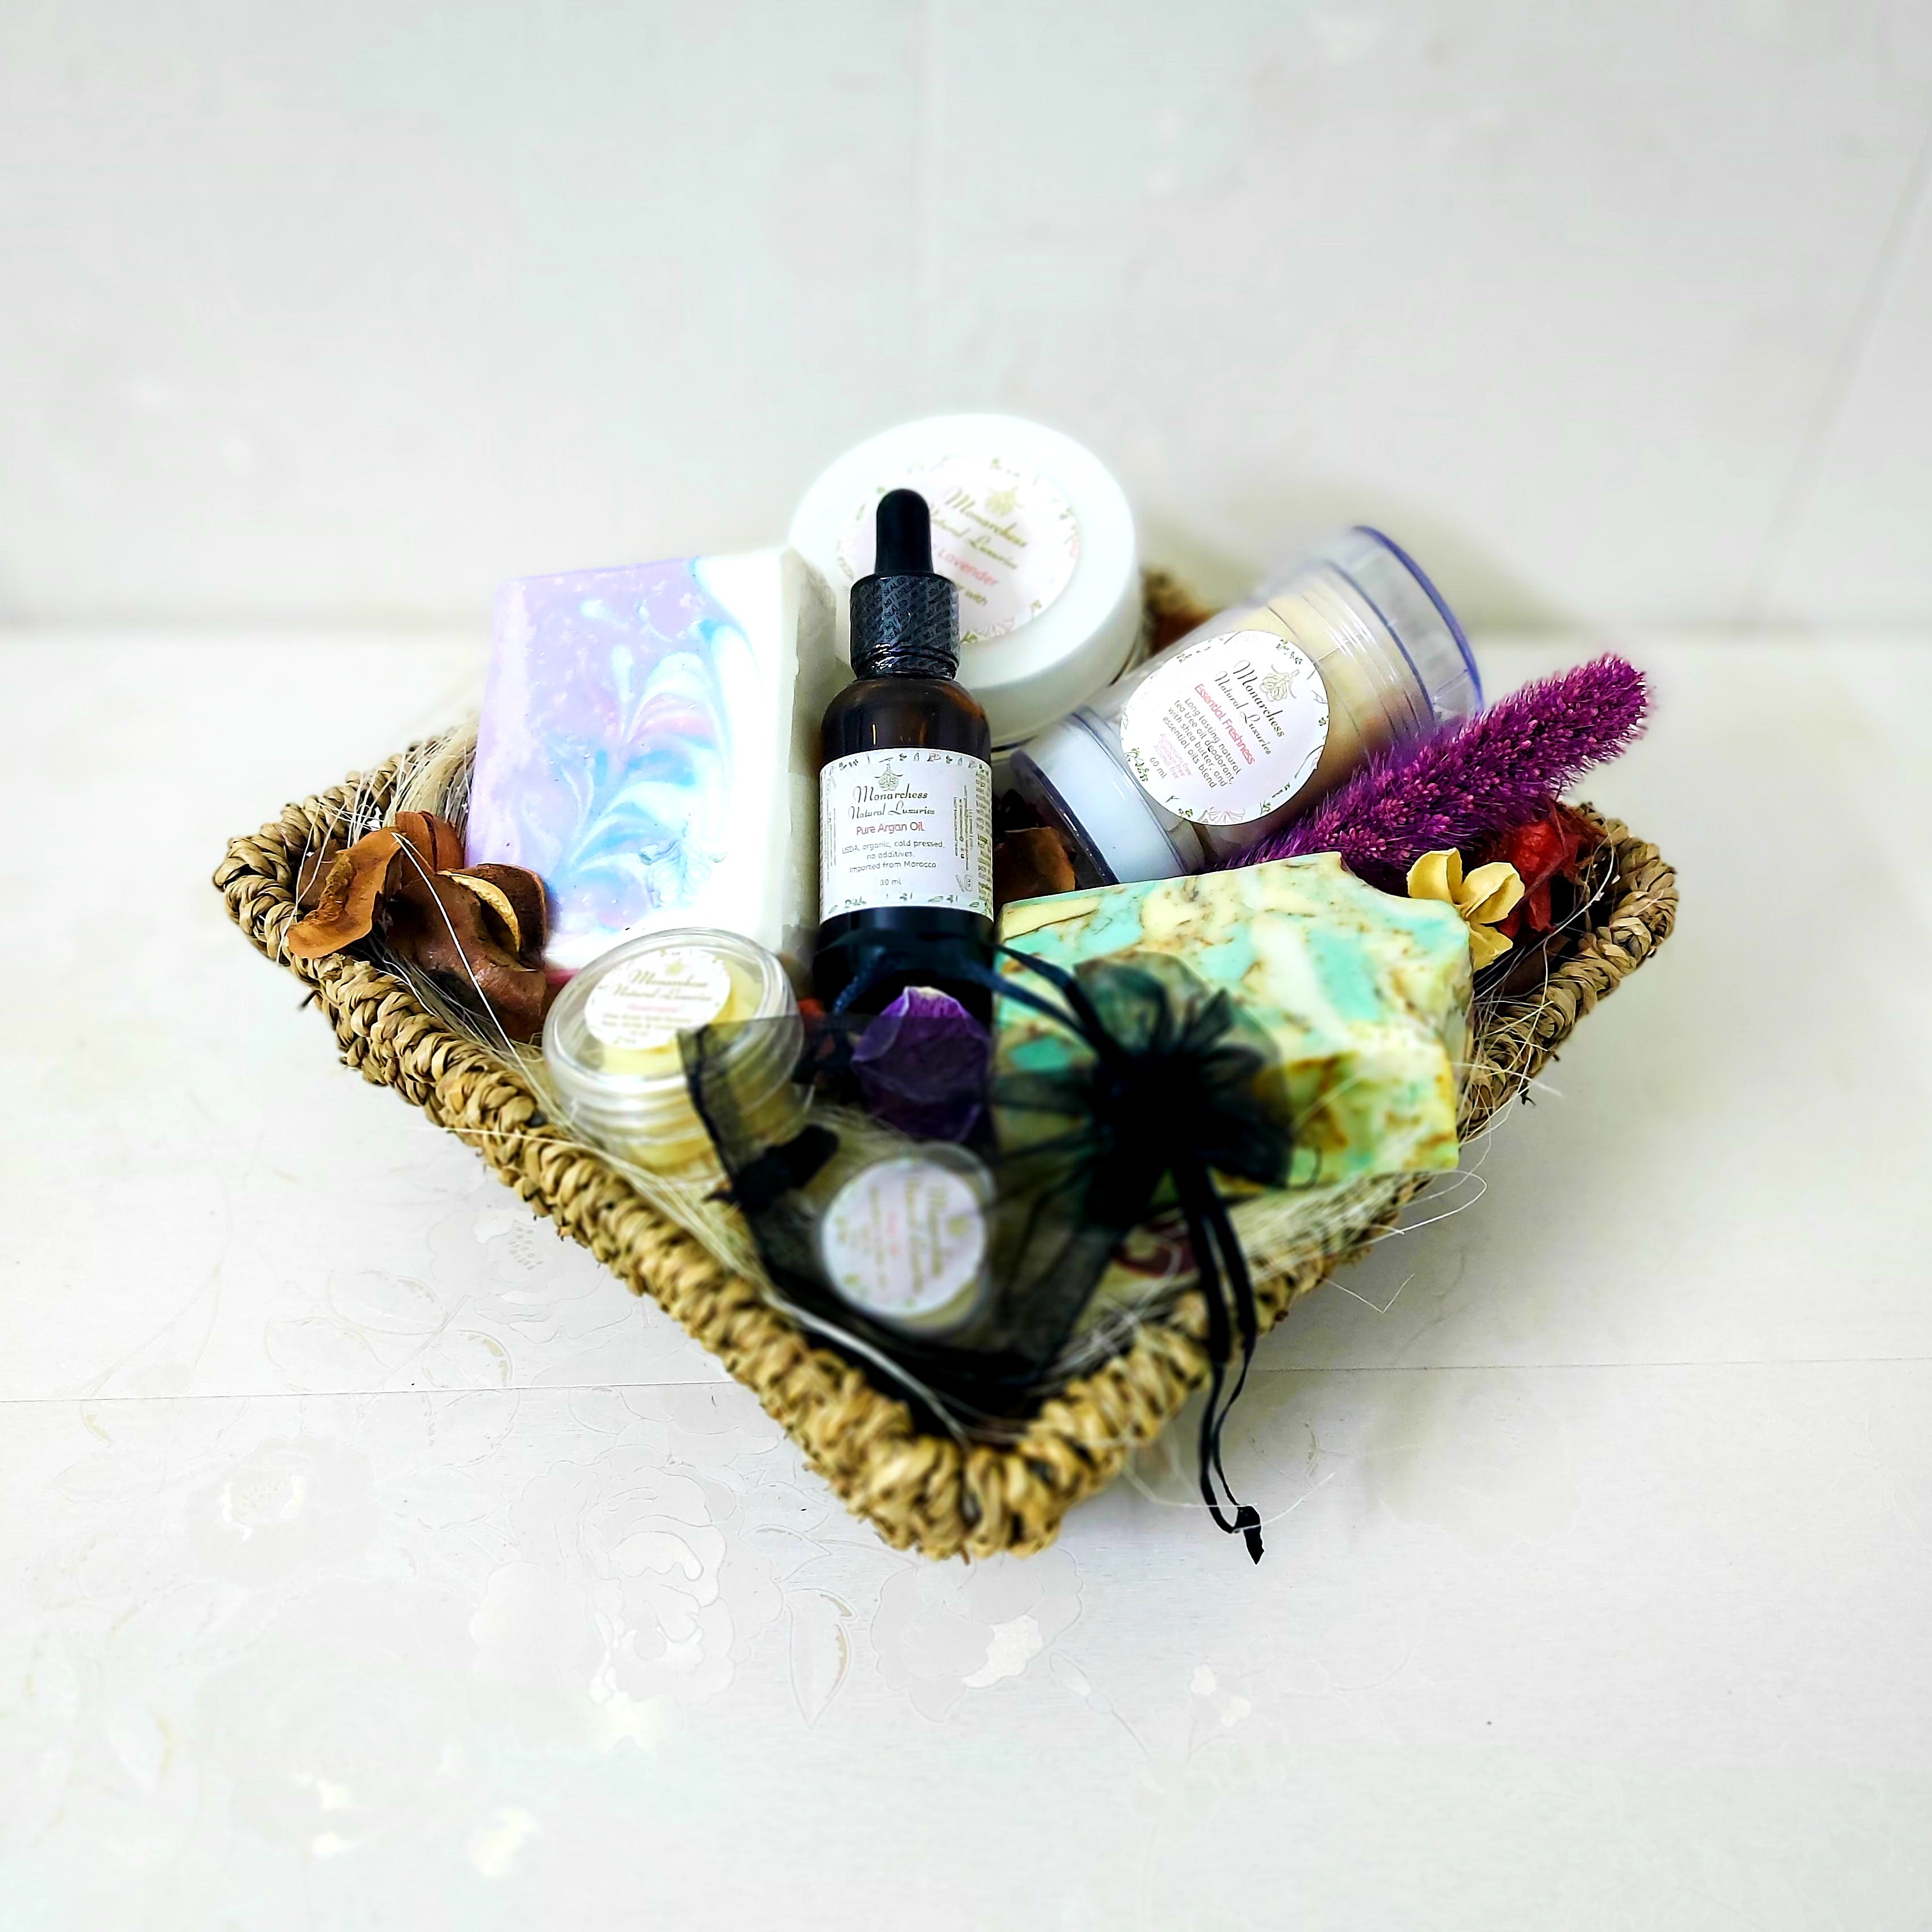 Gift basket contains lavender oil soap with shea butter, argan oil soap with shea butter, lavender body butter with shea butter, pure argan oil 30ml, Essential Freshness natural deodrant, solid perfume, lip balm. Monarchess, Amman, Jordan.